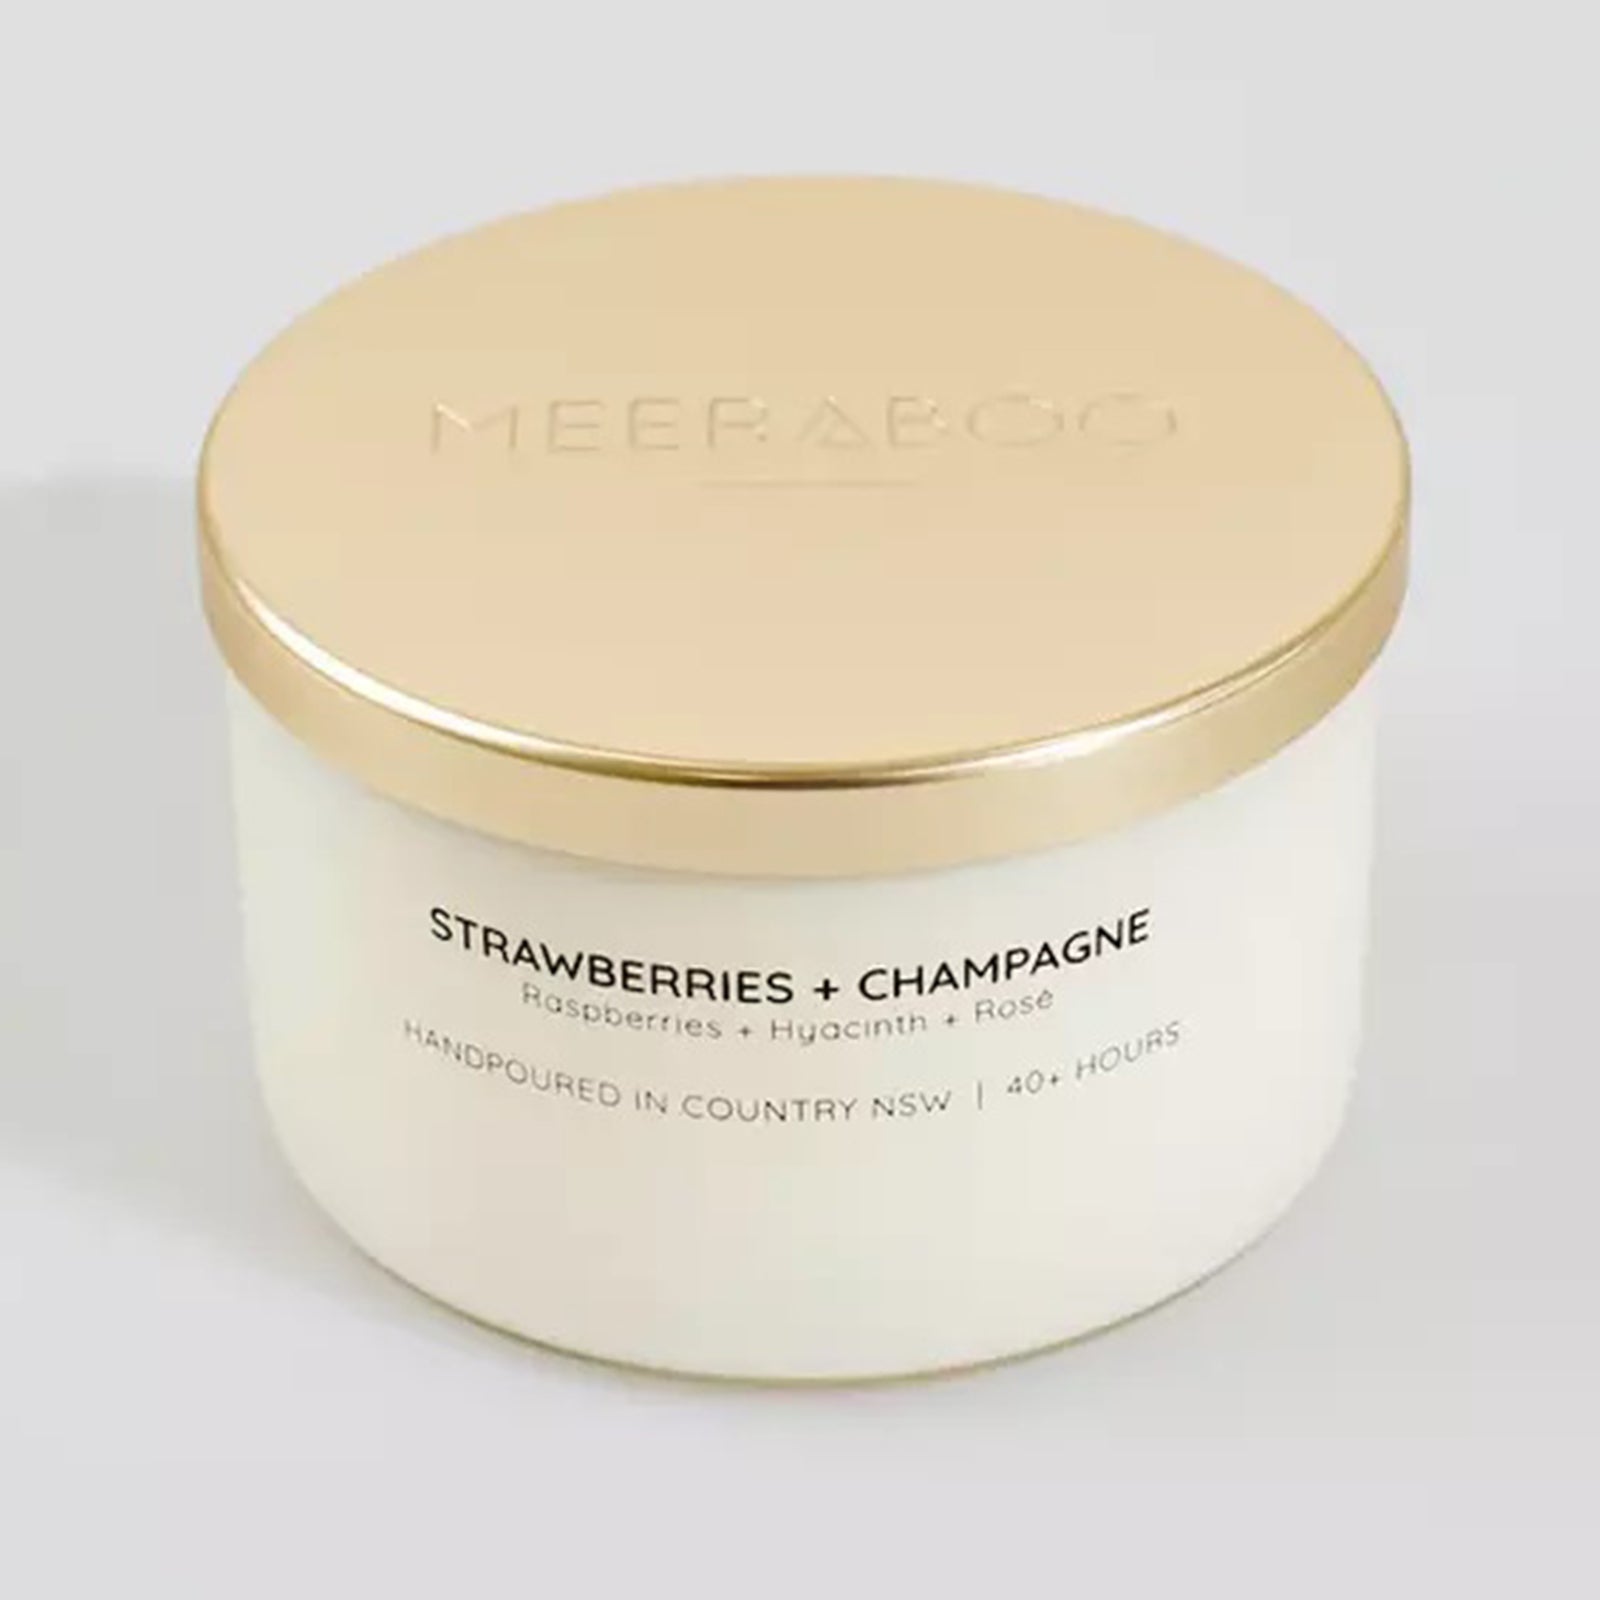 100% Natural Soy Wax "Strawberries & Champagne" Candle from Australia (330g) - Horizon Farms